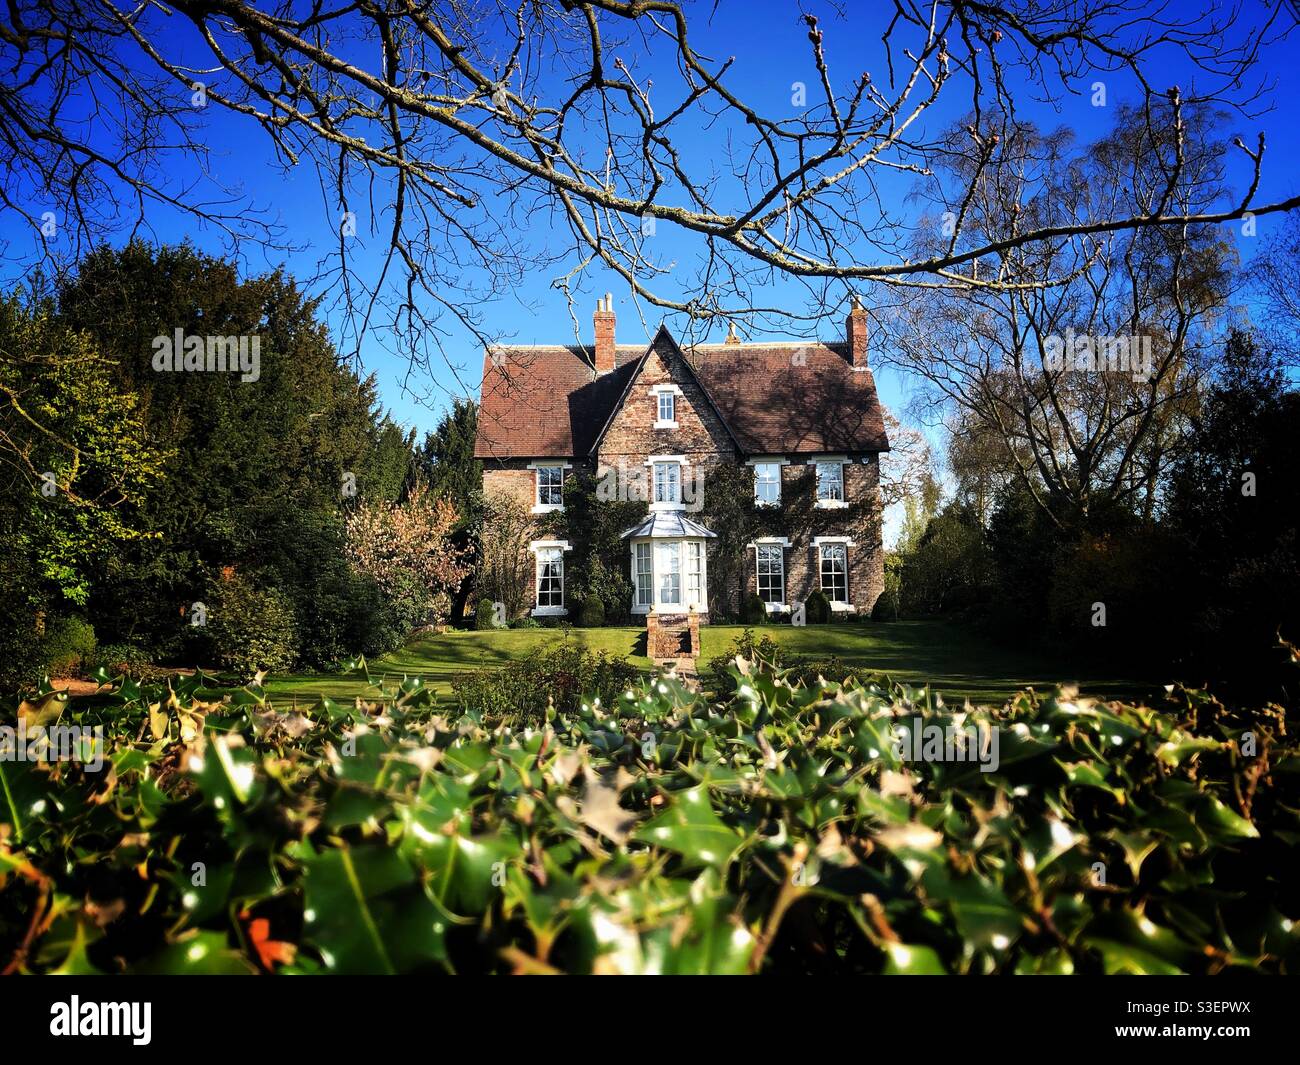 Country house Stock Photo